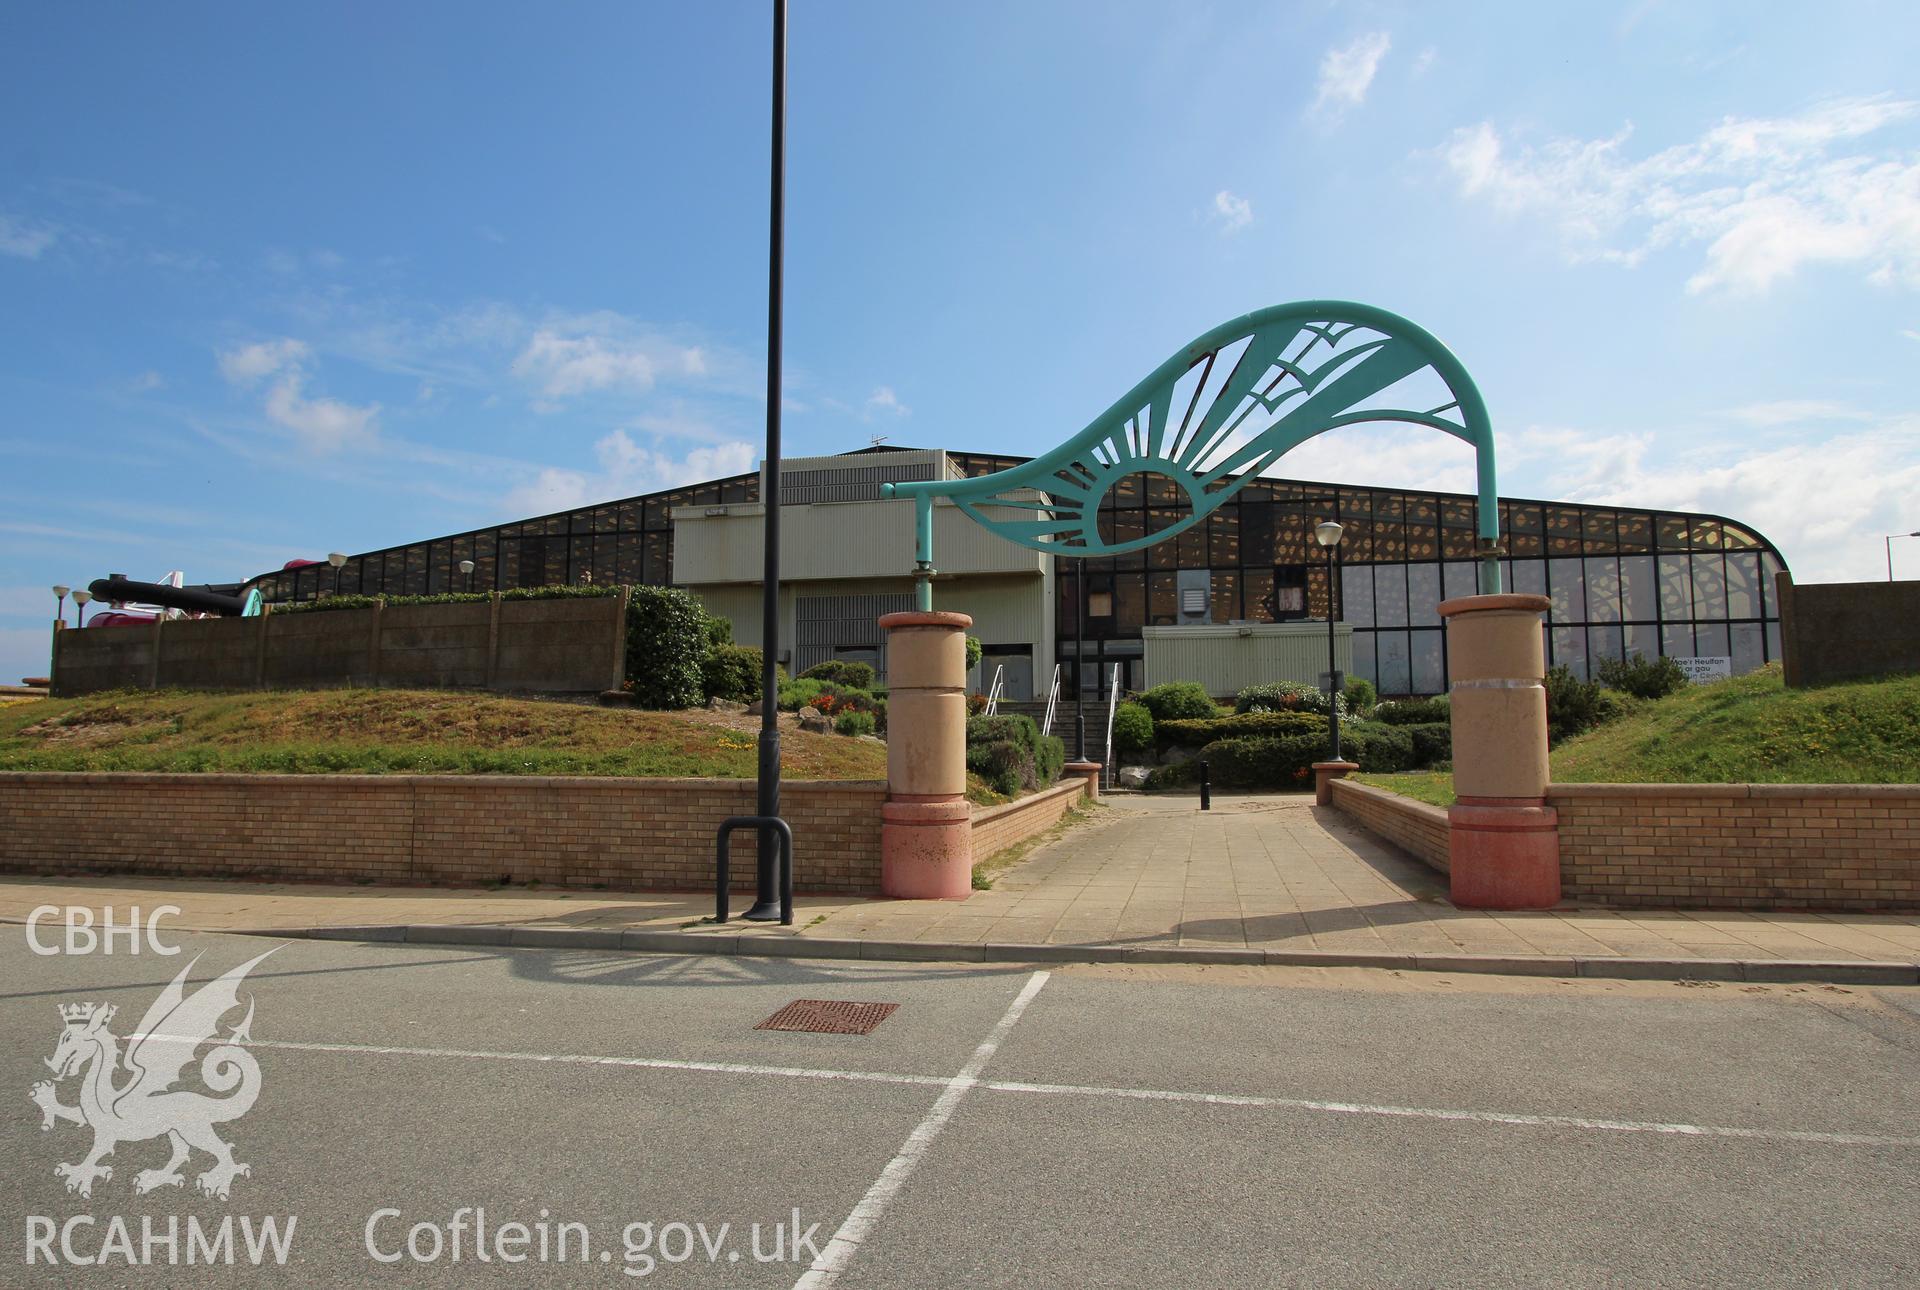 Exterior view of Rhyl Sun Centre, taken by Sue Fielding, 27th May 2016.